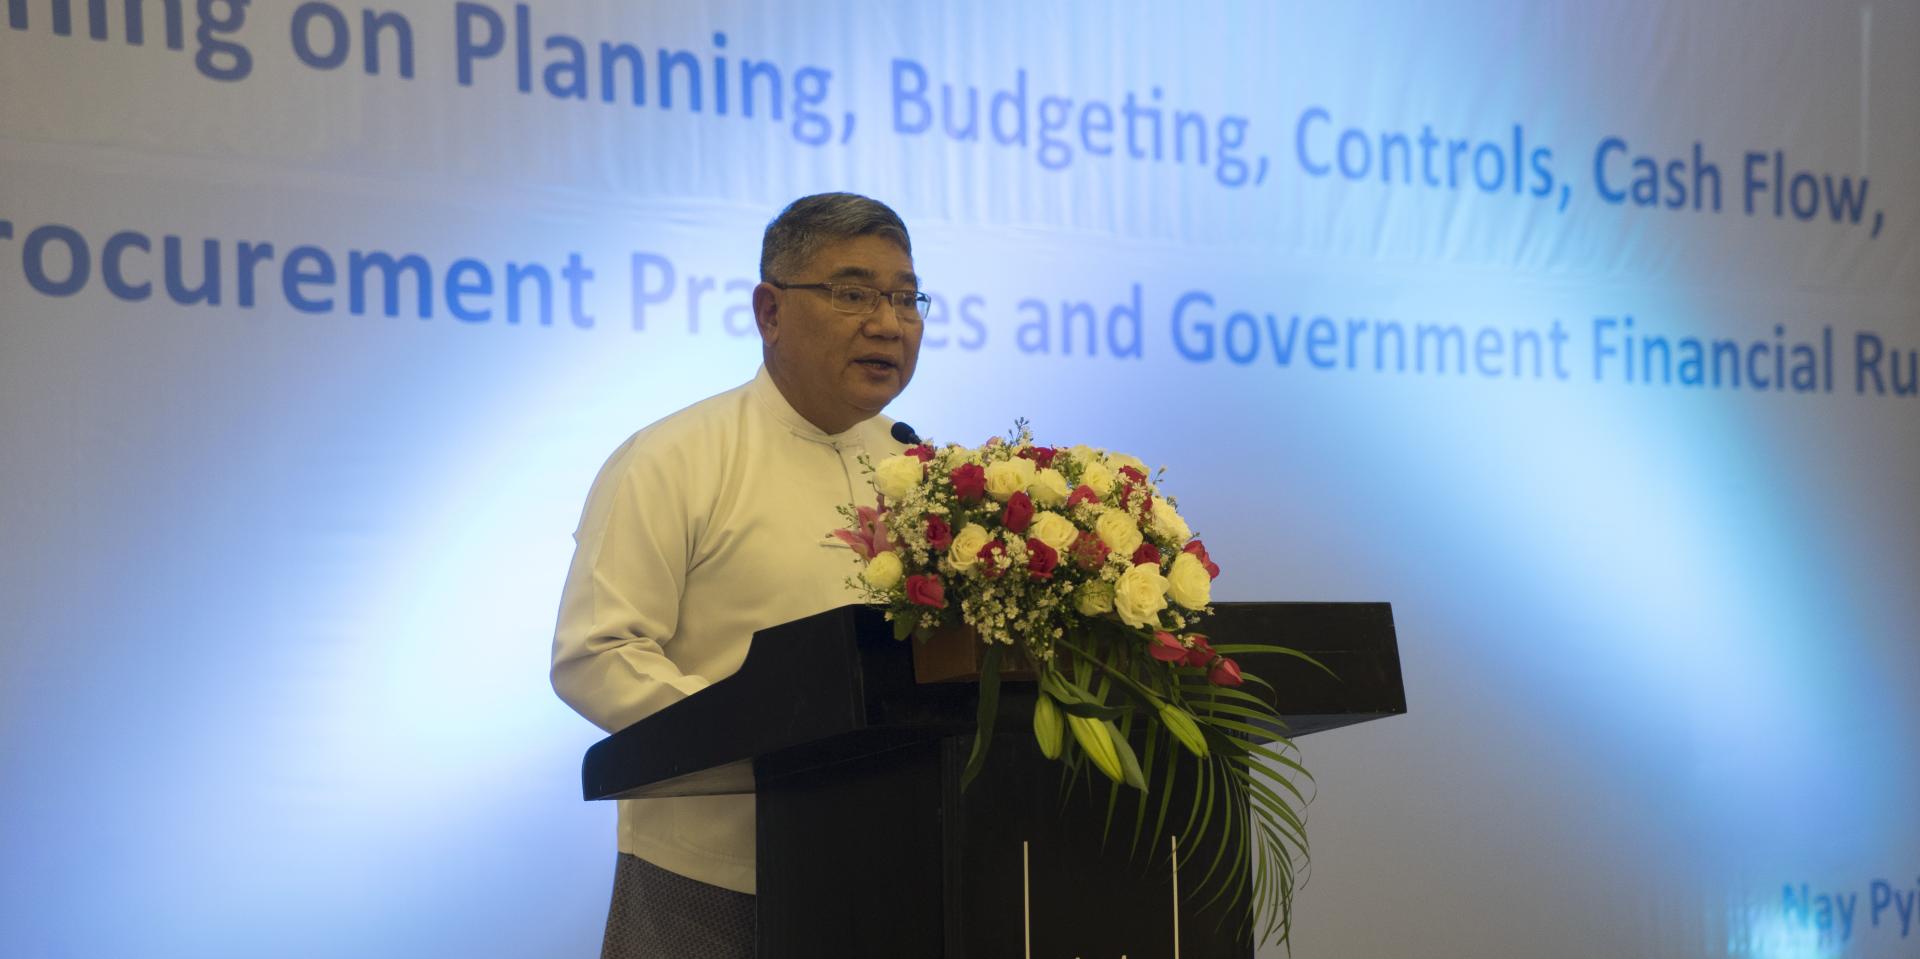 Dr Thar Tun Kyaw, Director General, DOPH, MOHS, delivers the opening speech for the third batch of training on ‘Planning, Budgeting, Controls, Cash Flow, Good Procurement Practices and Government Financial Rules’, Nay Pyi Taw, 6 November 2017.